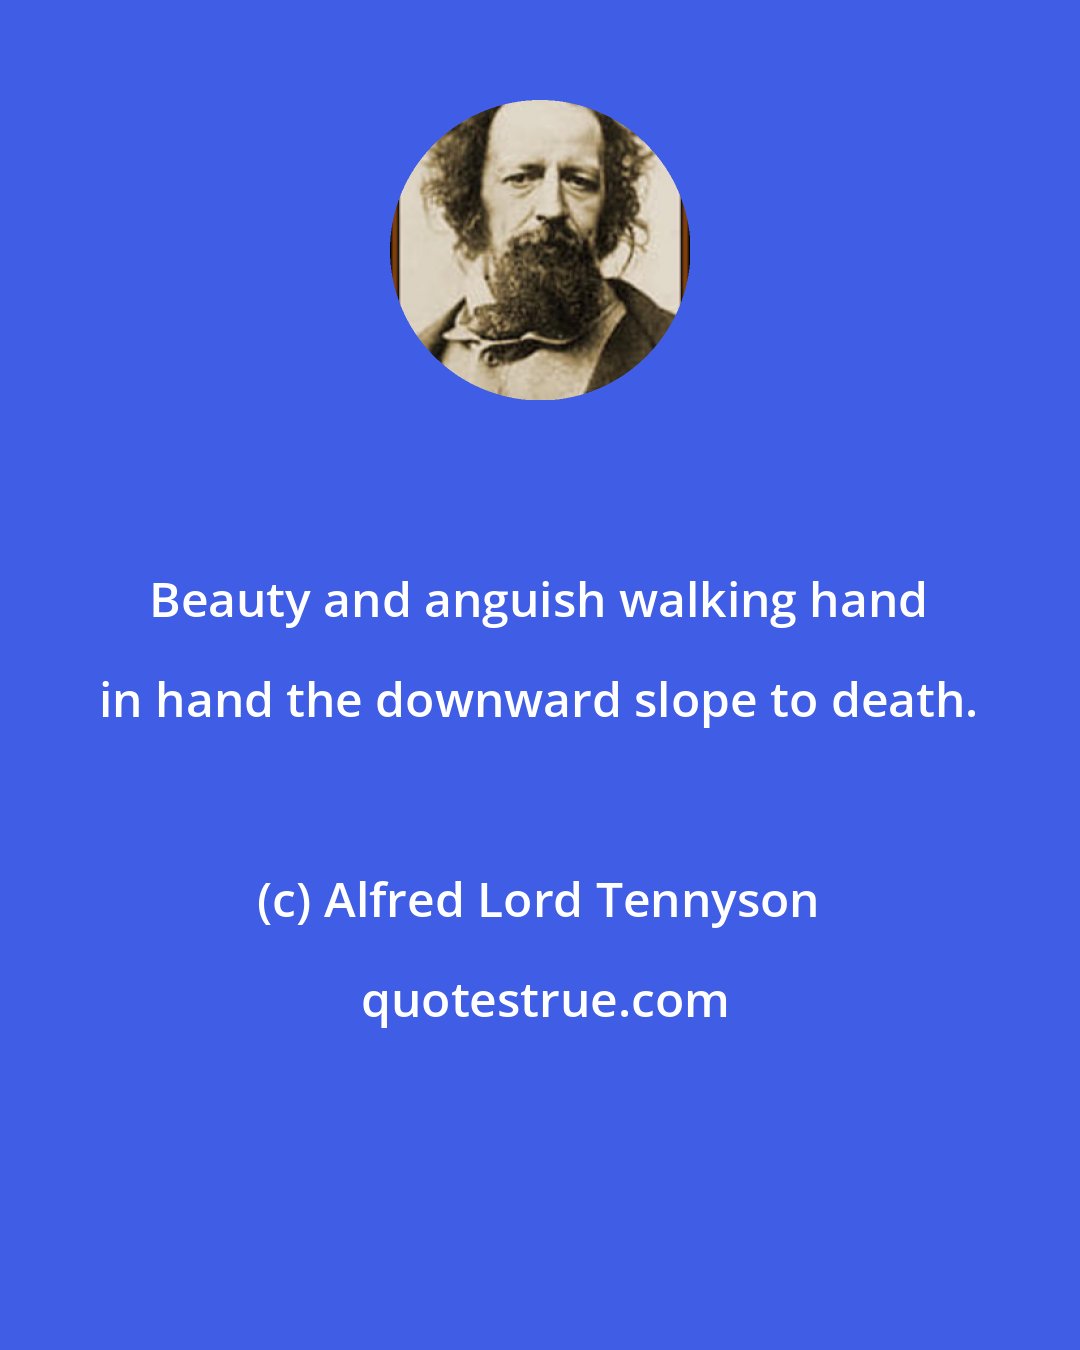 Alfred Lord Tennyson: Beauty and anguish walking hand in hand the downward slope to death.